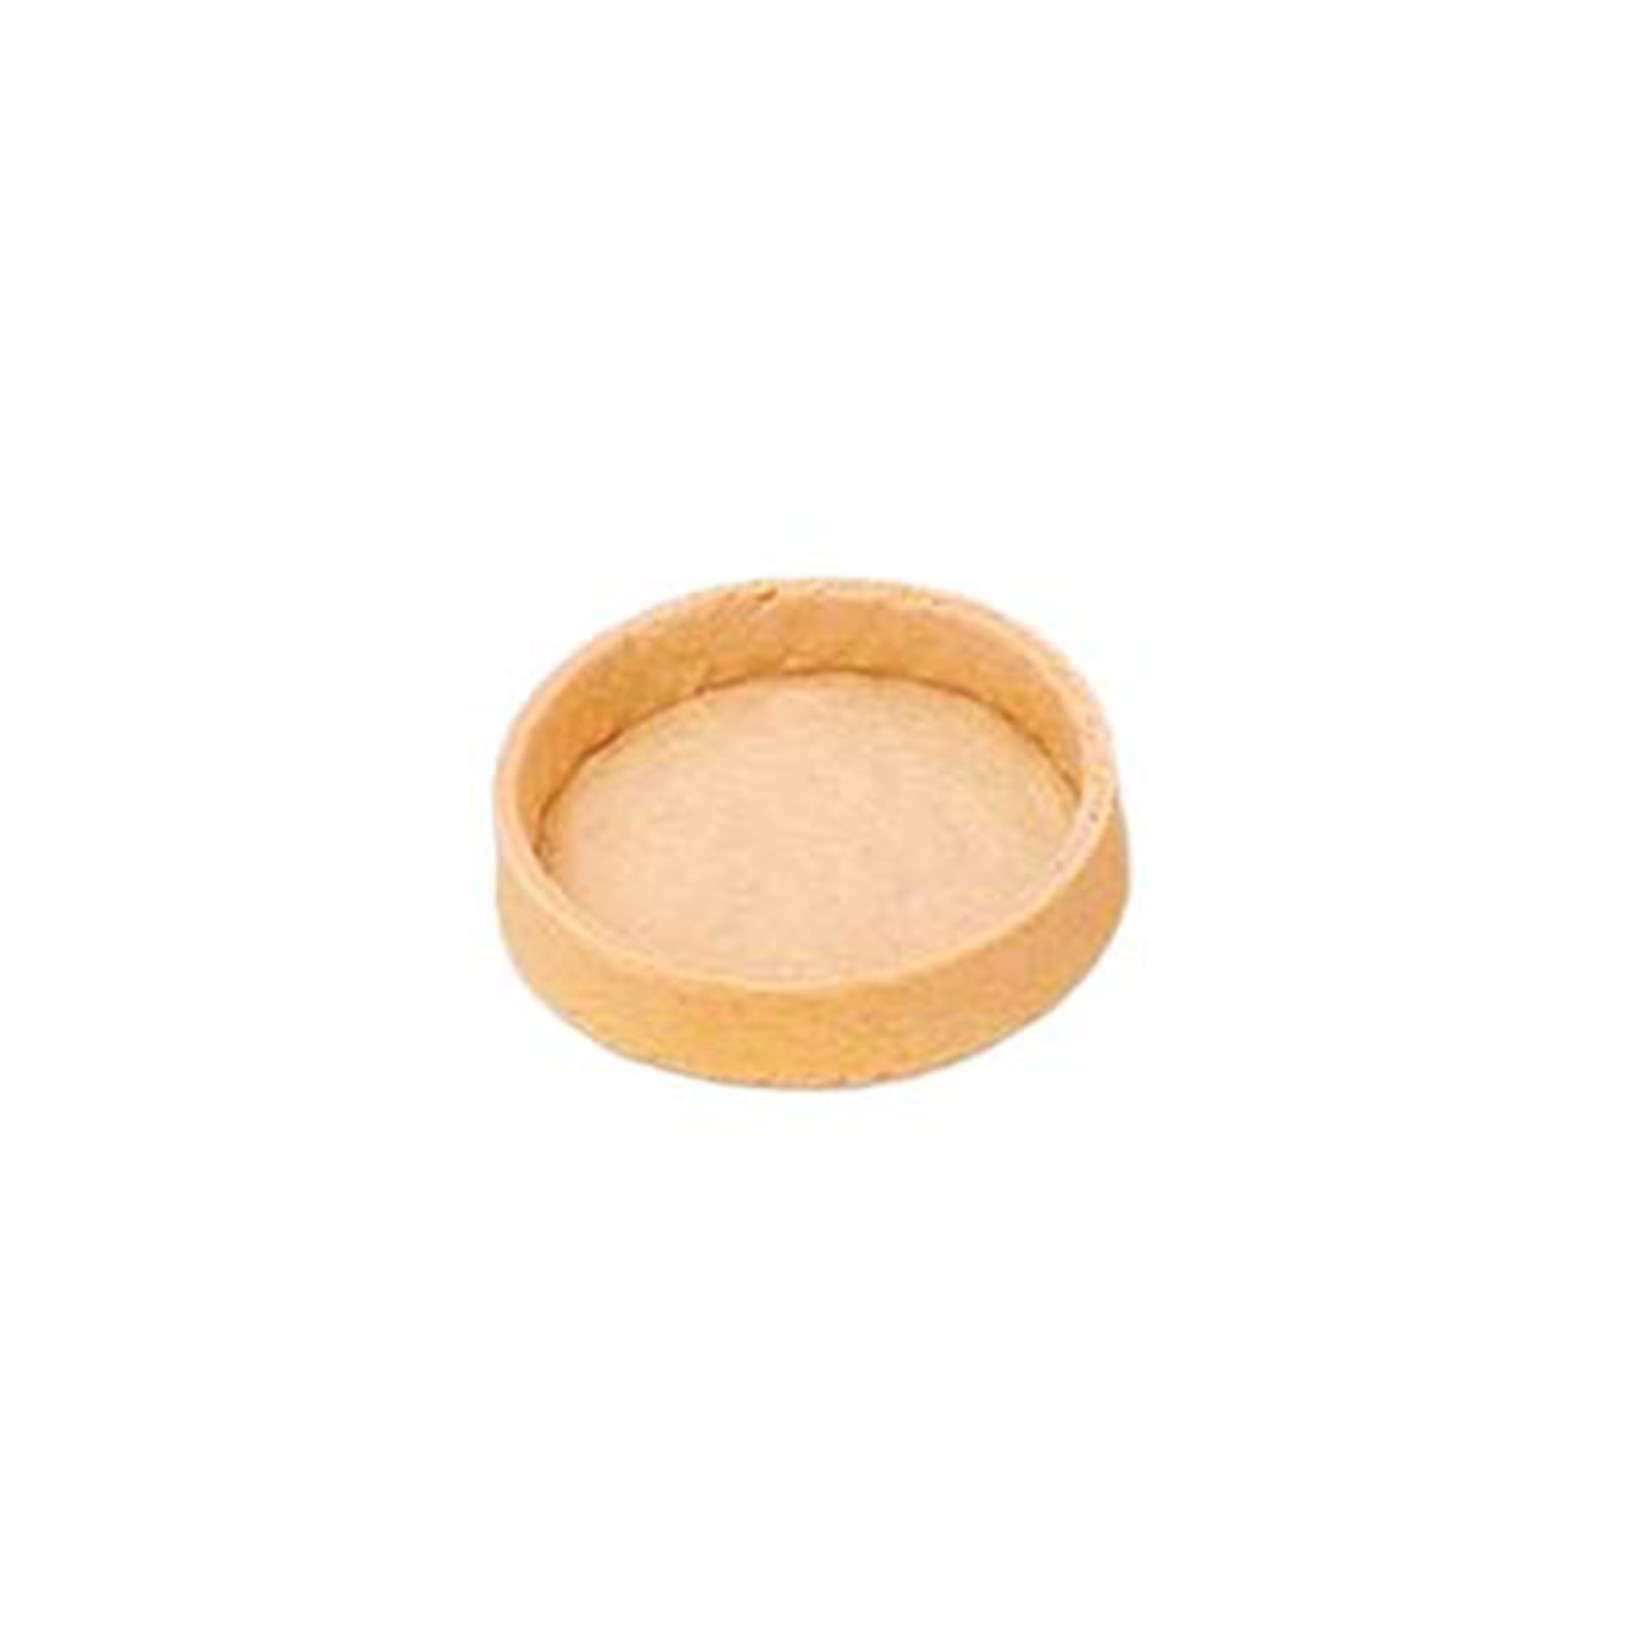 Le Chic Patissier Le Chic Patissier - Tart shell, Sweet round - 4'' (40ct), 79024